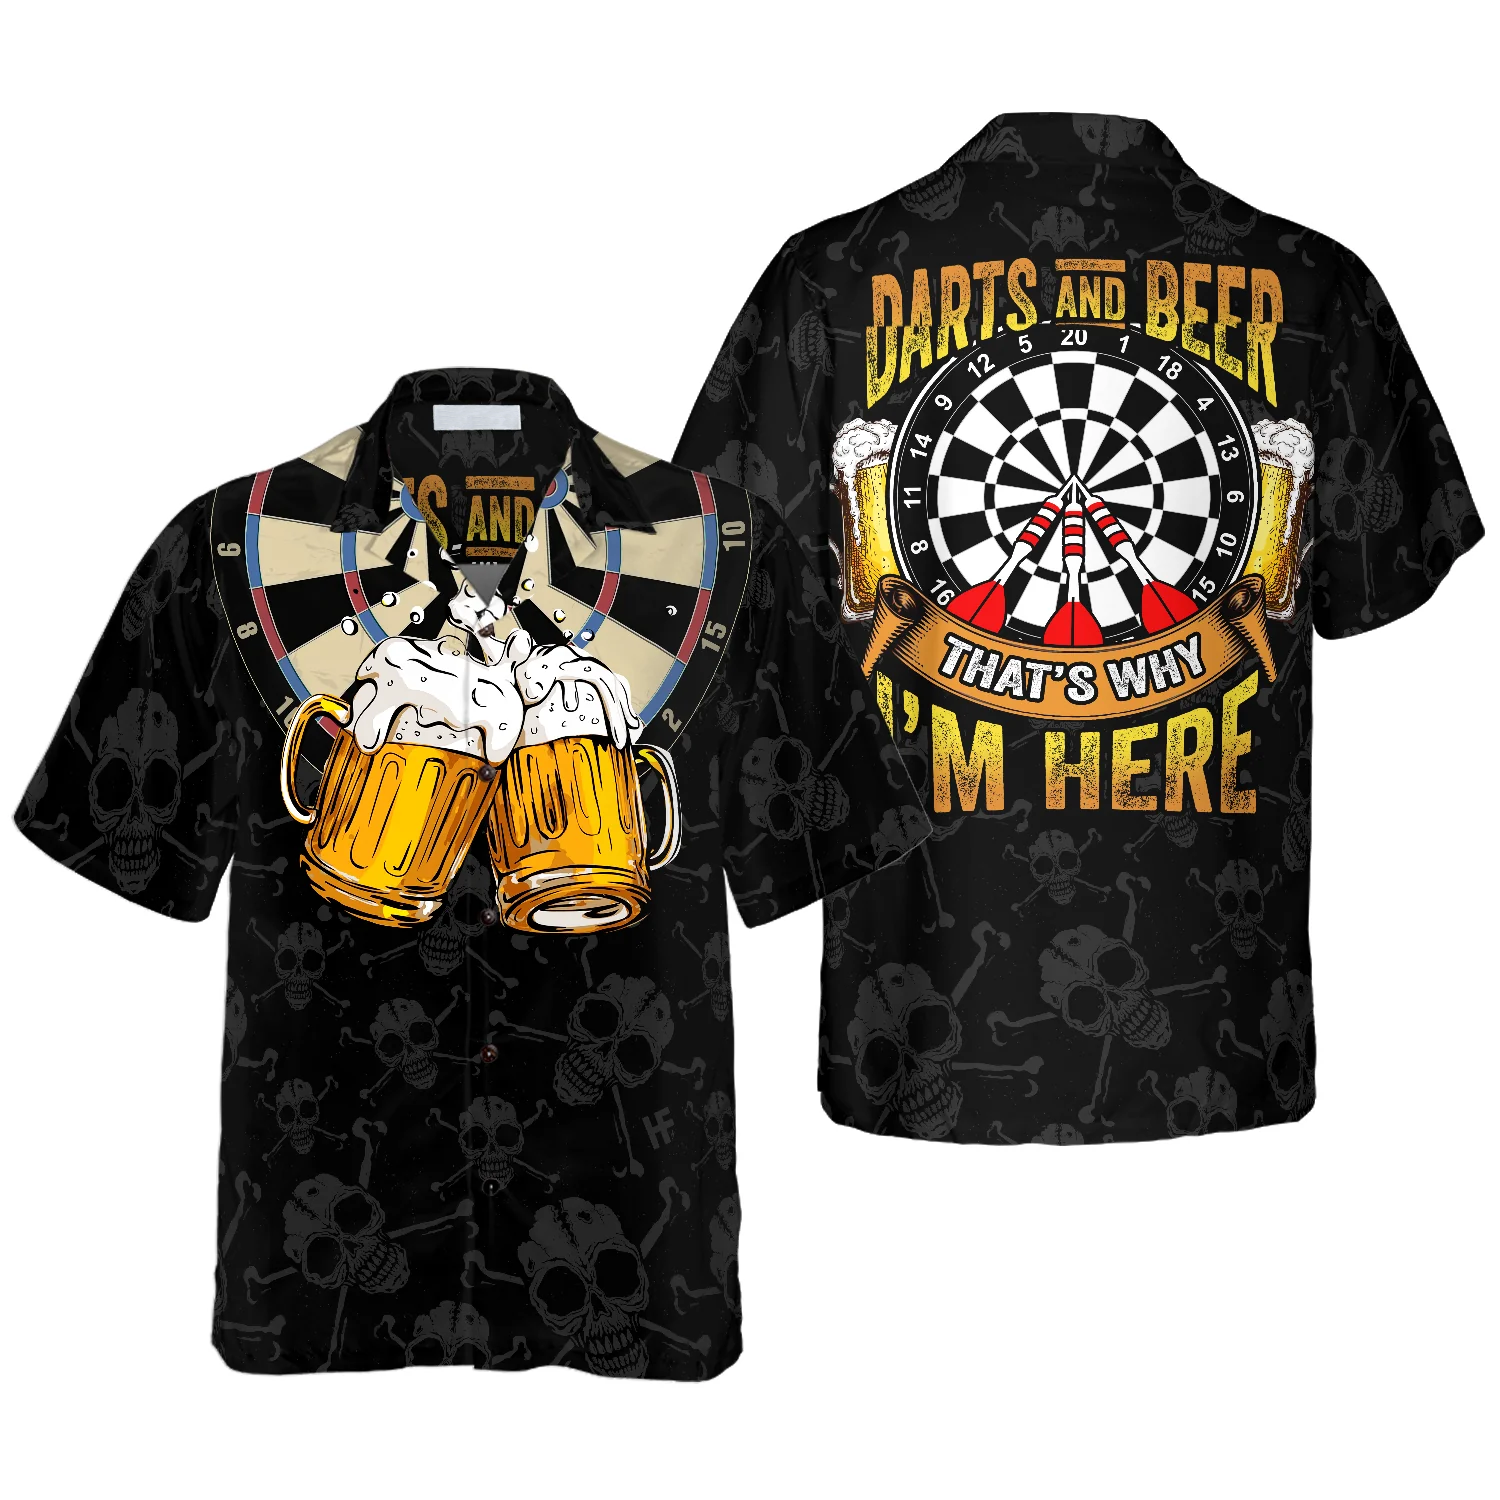 Darts And Beer Hawaiian Shirt/ Colorful Summer Aloha Shirt For Men Women/ Perfect Gift For Friend/ Team/ Family/ Darts Beer Lovers